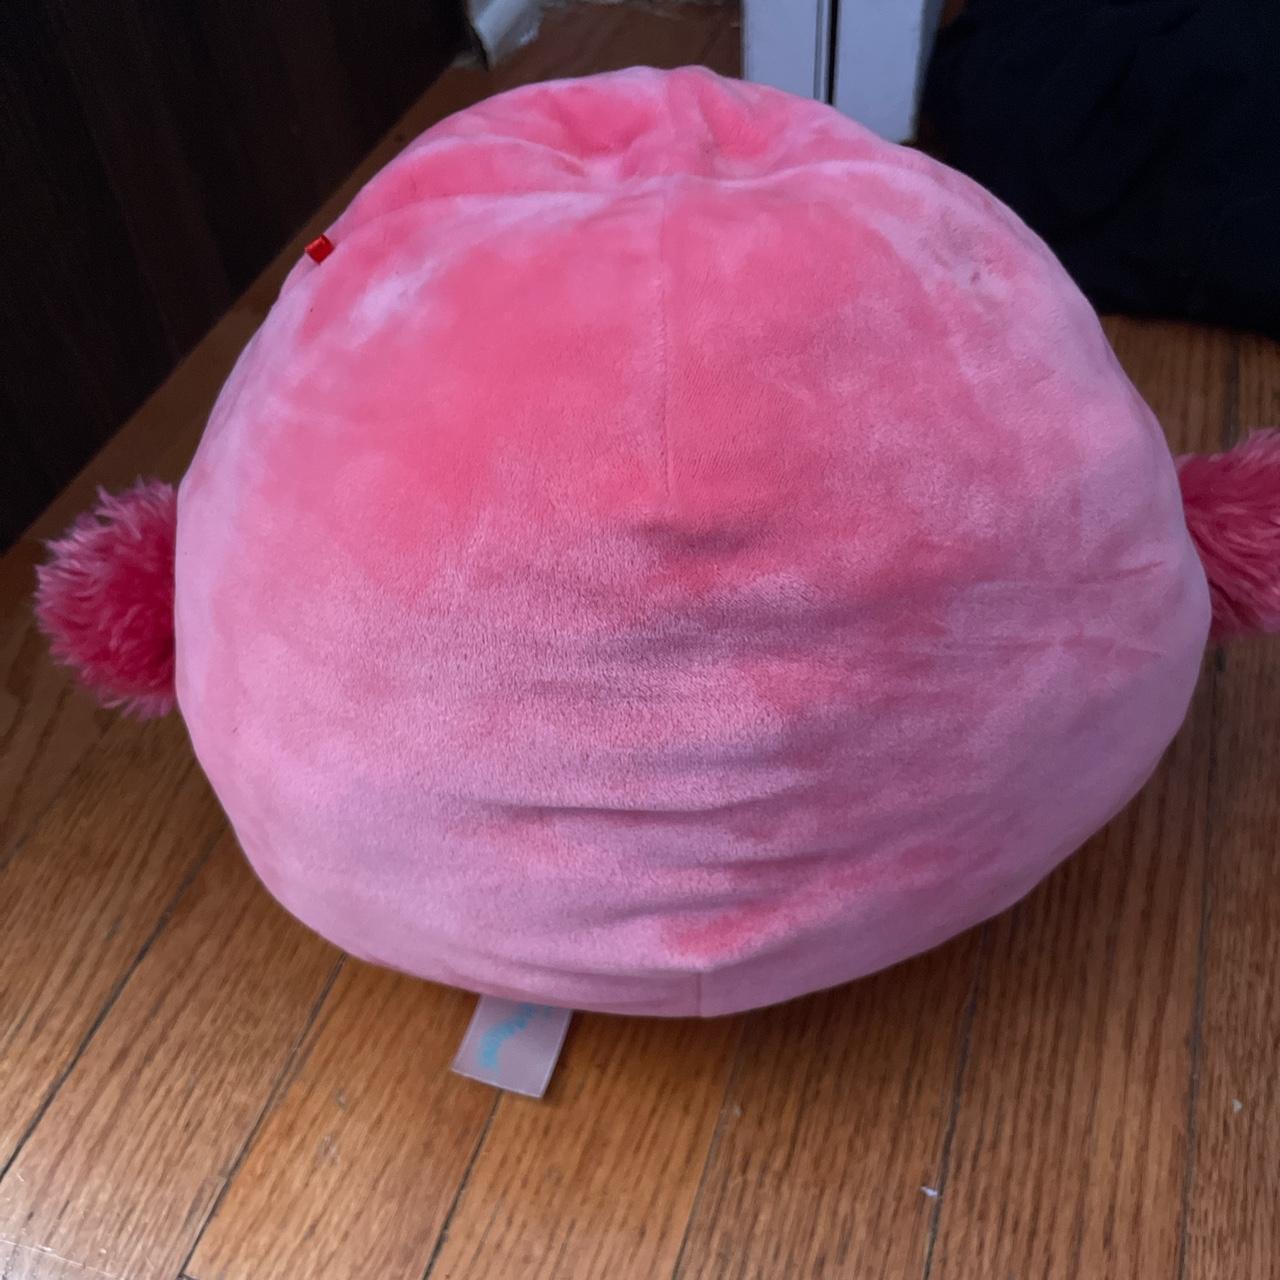 cookie the flamingo squishmallow, in great - Depop